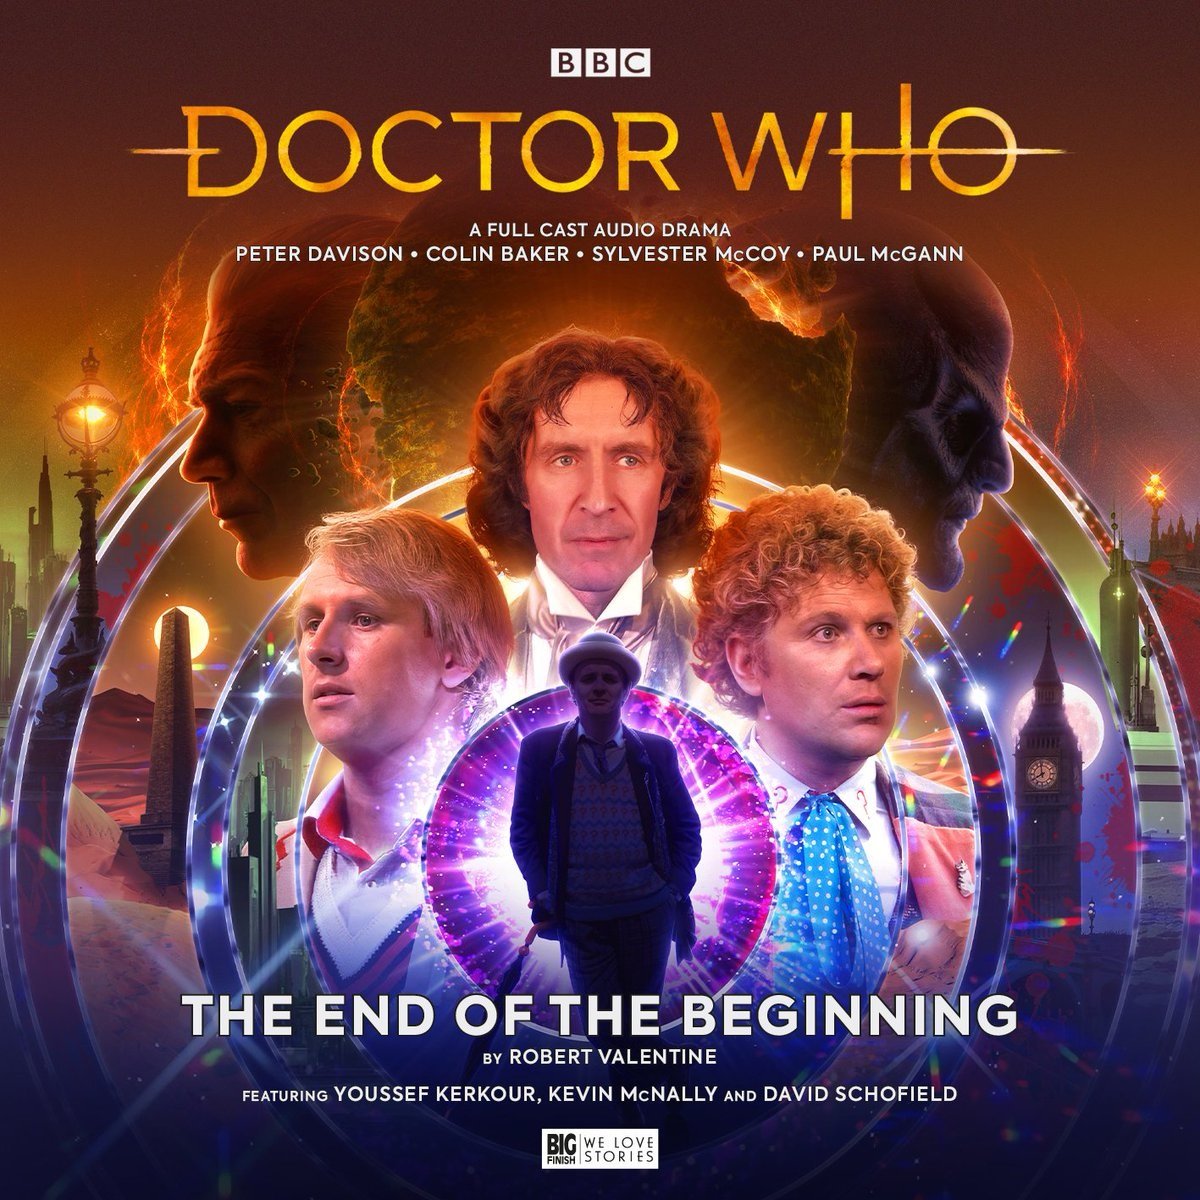 Big Finish Reveals the Last Doctor Who Main Range Title, The End of the Beginning